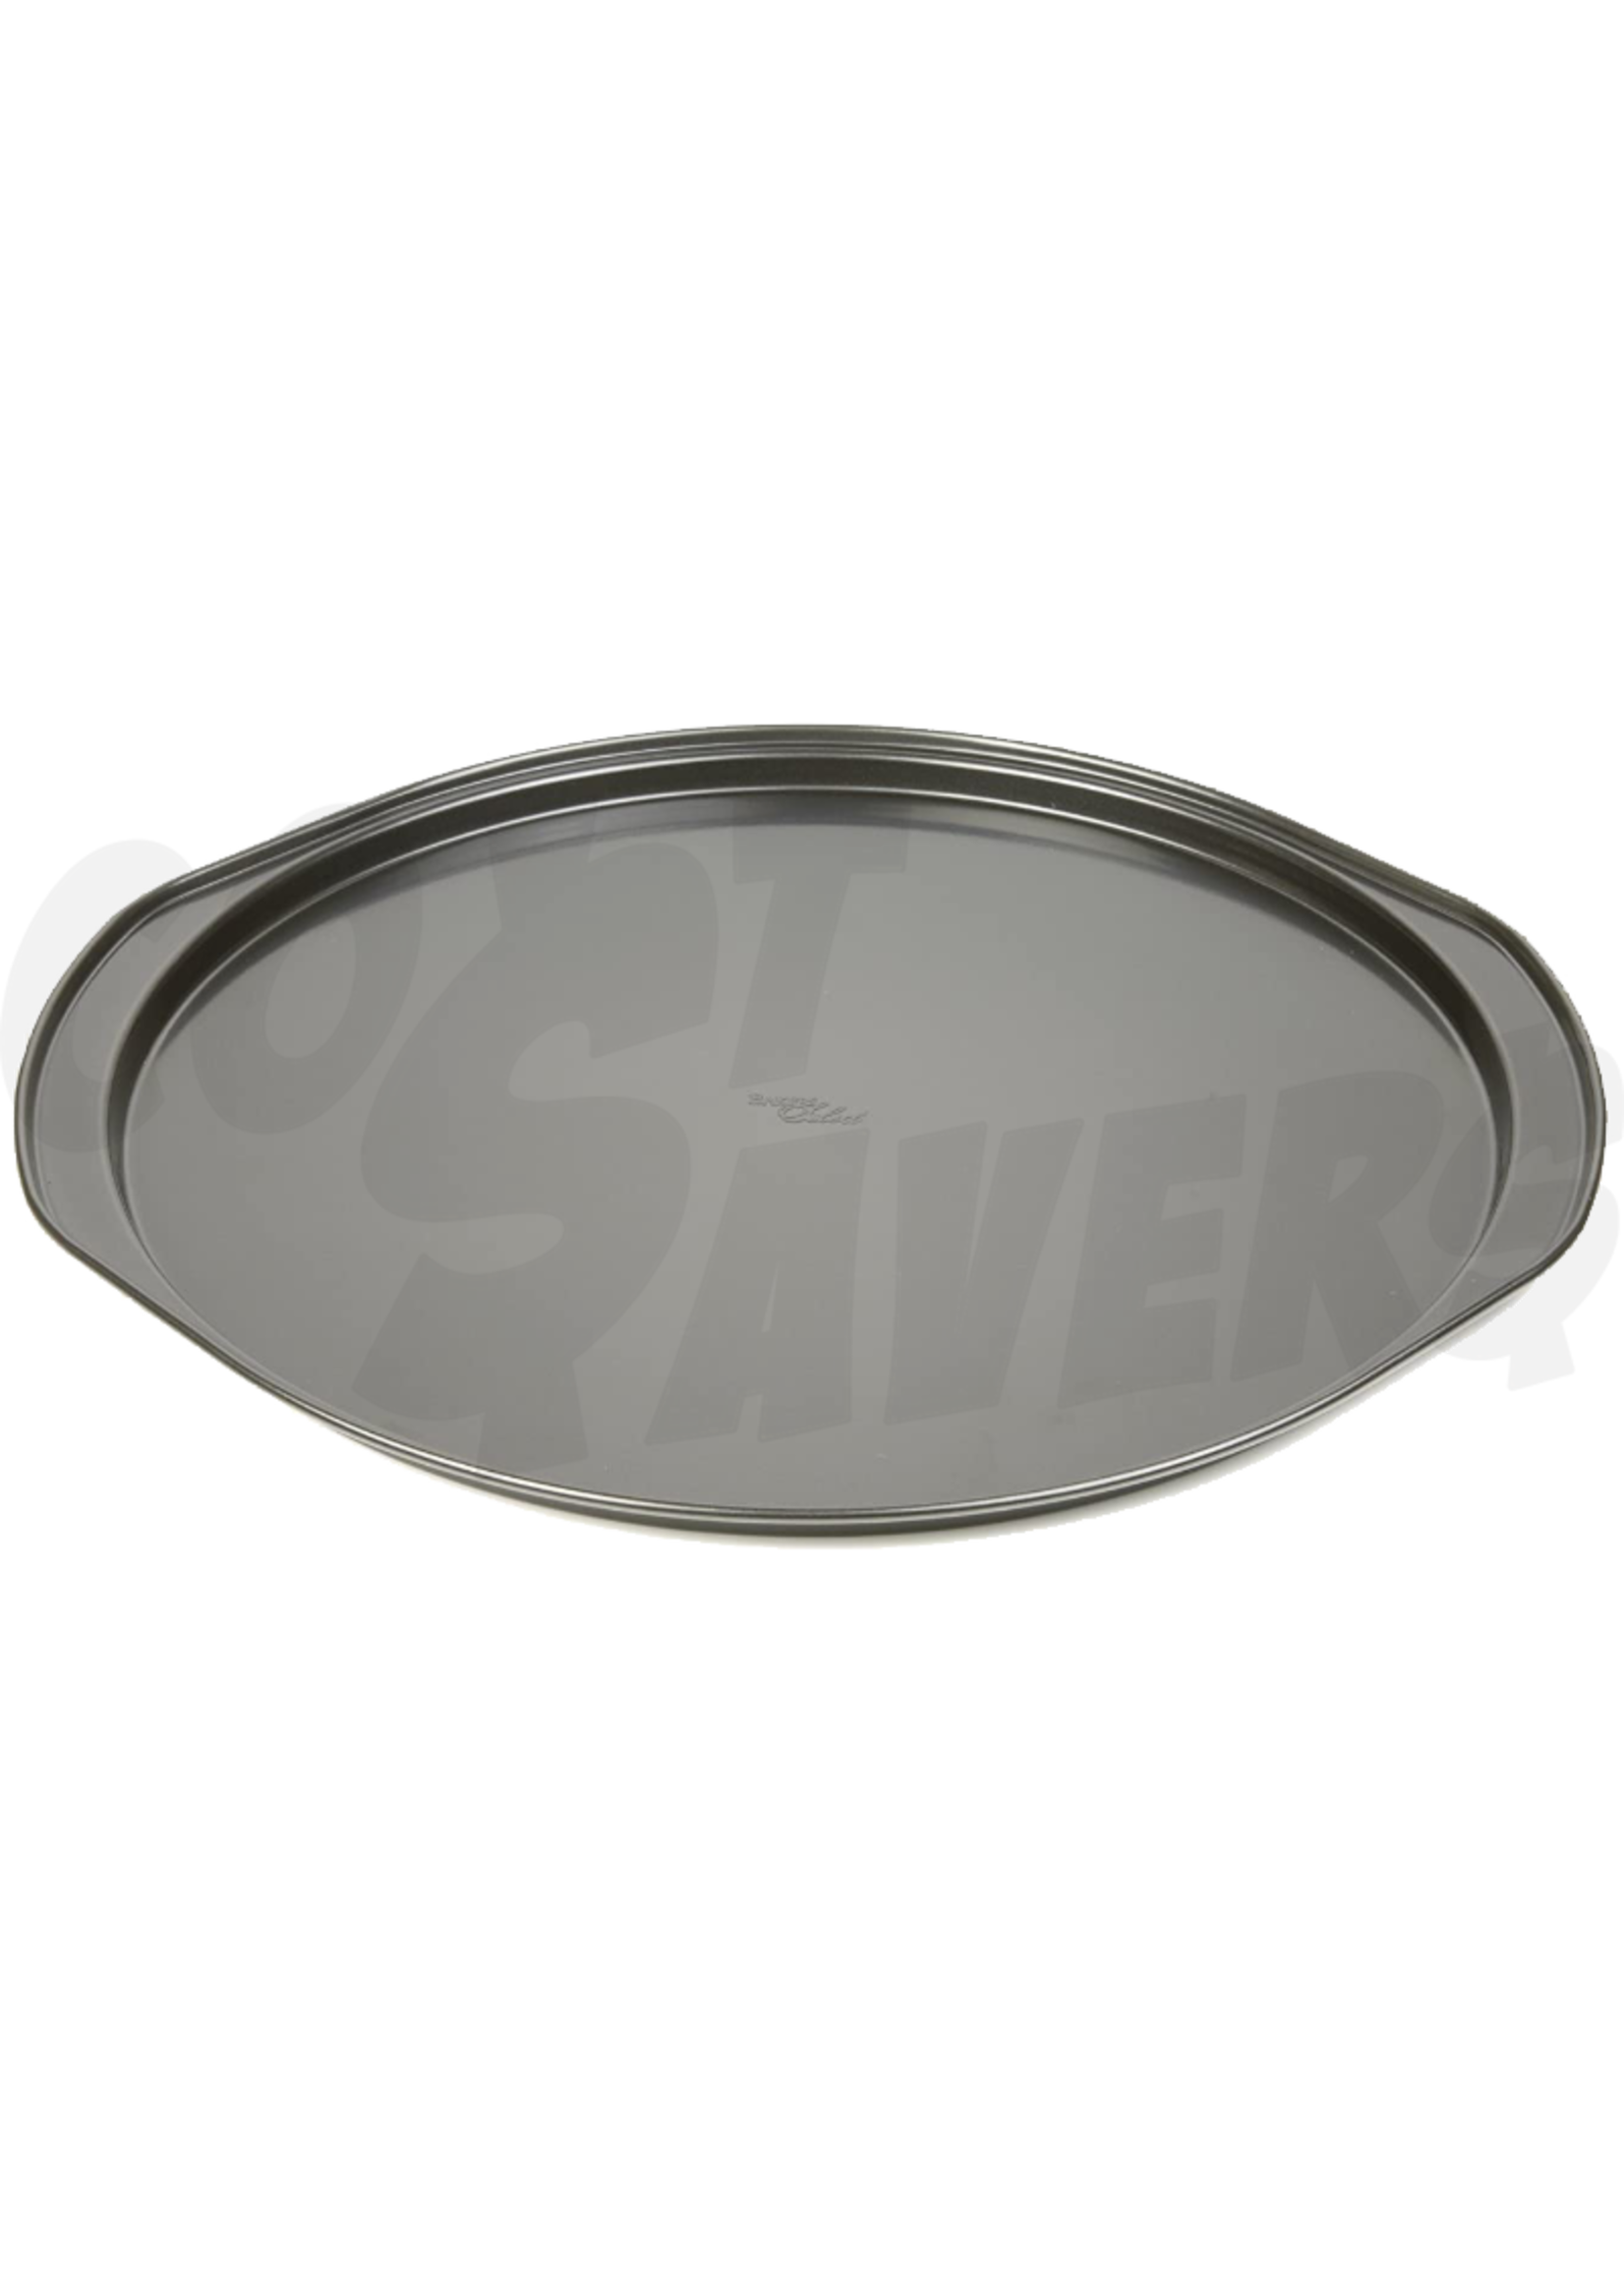 Bakers Select Bakers Select 13" x 1" Pizza Pan